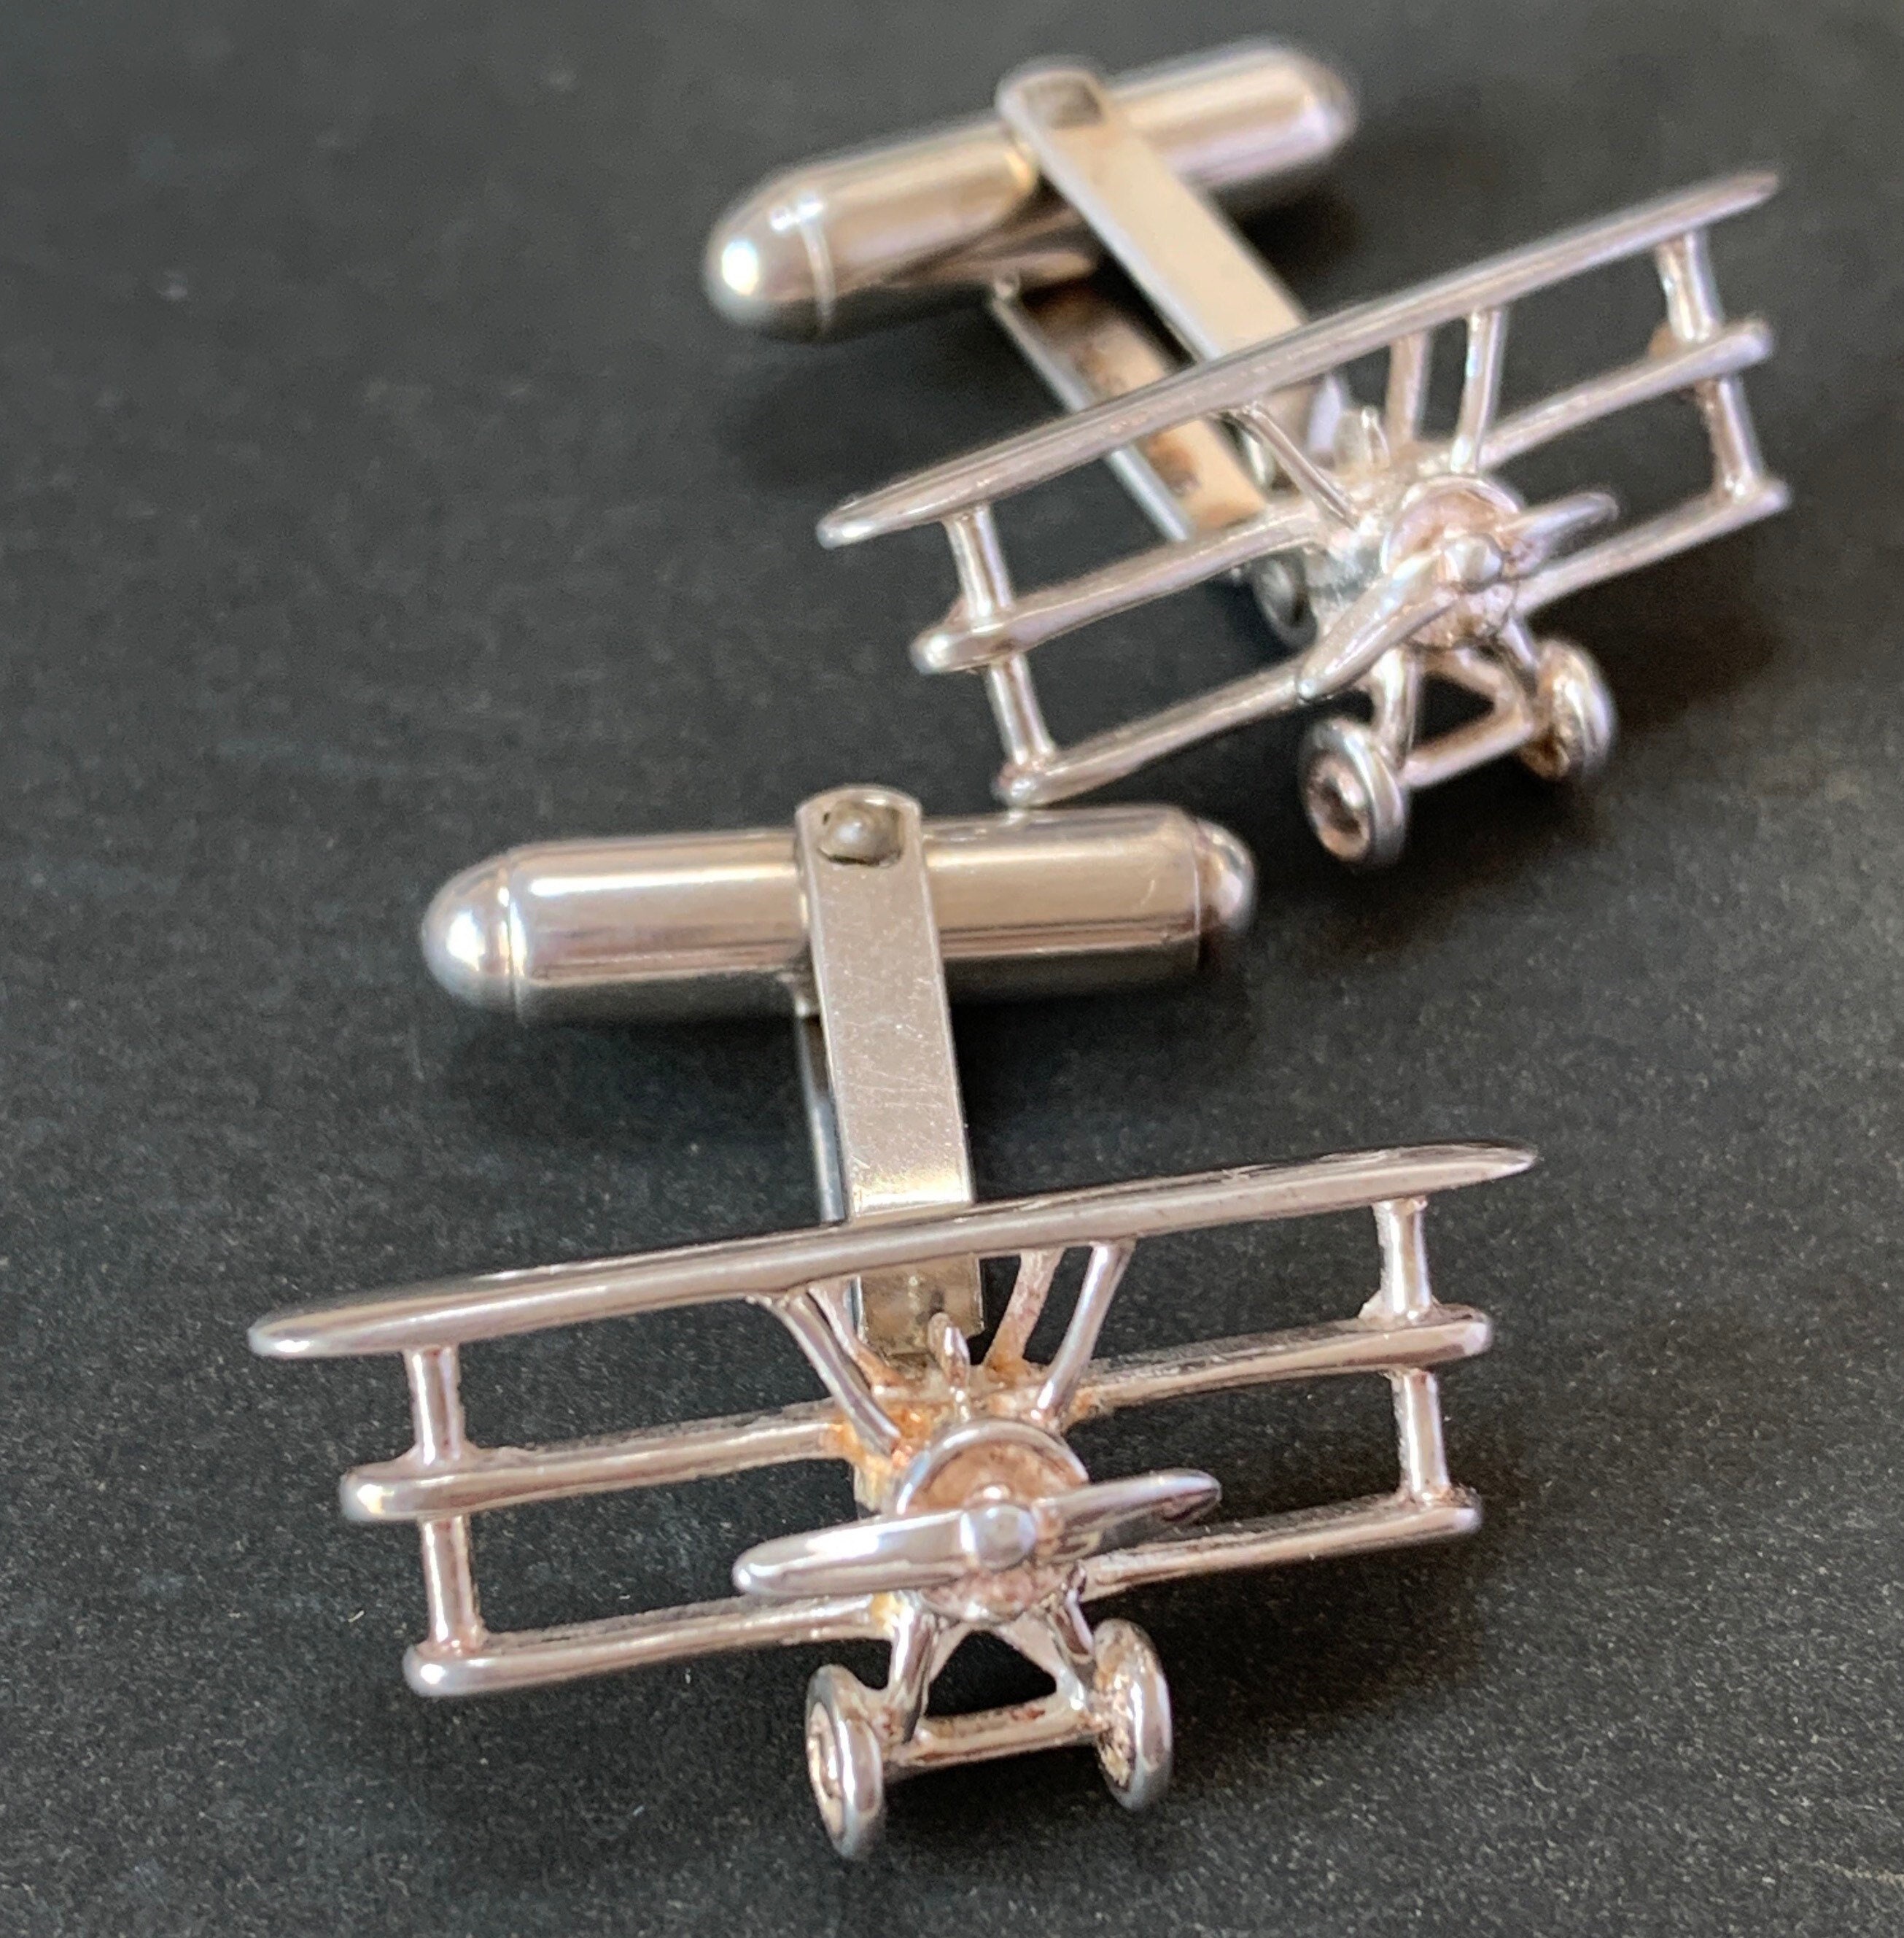 Lovely Pair Of Novelty Mens Triplane Aircraft Cuff Links Similar To Deakin & Francis Styles. in Excellent Condition For Vintage 1980S